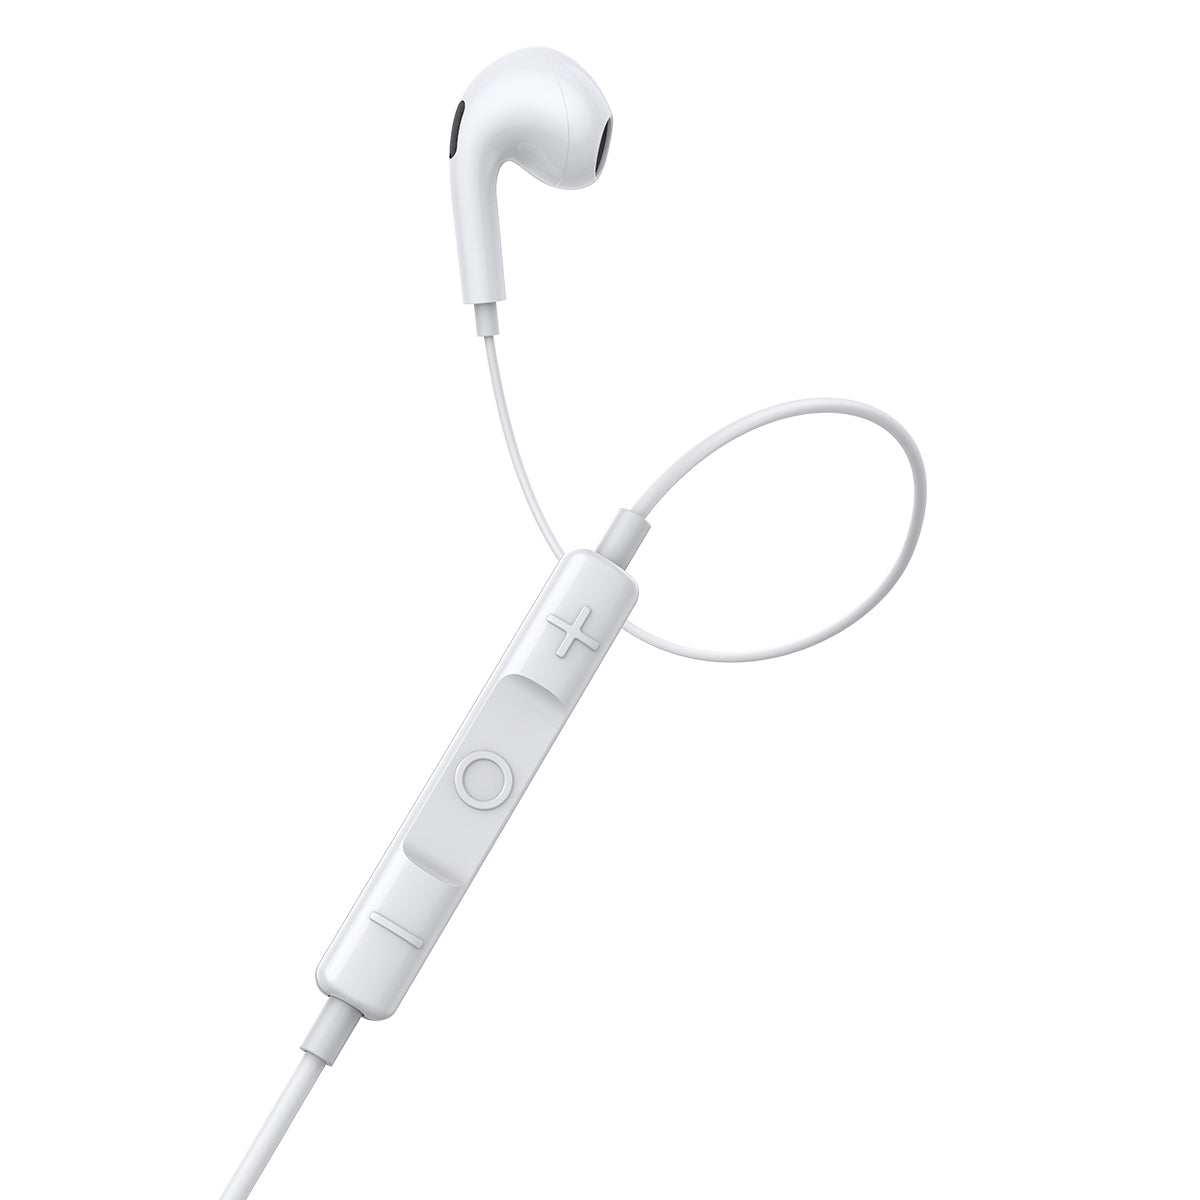 Baseus H17 Encok 3.5mm Lateral In-Ear Wired Earphone with Remote White